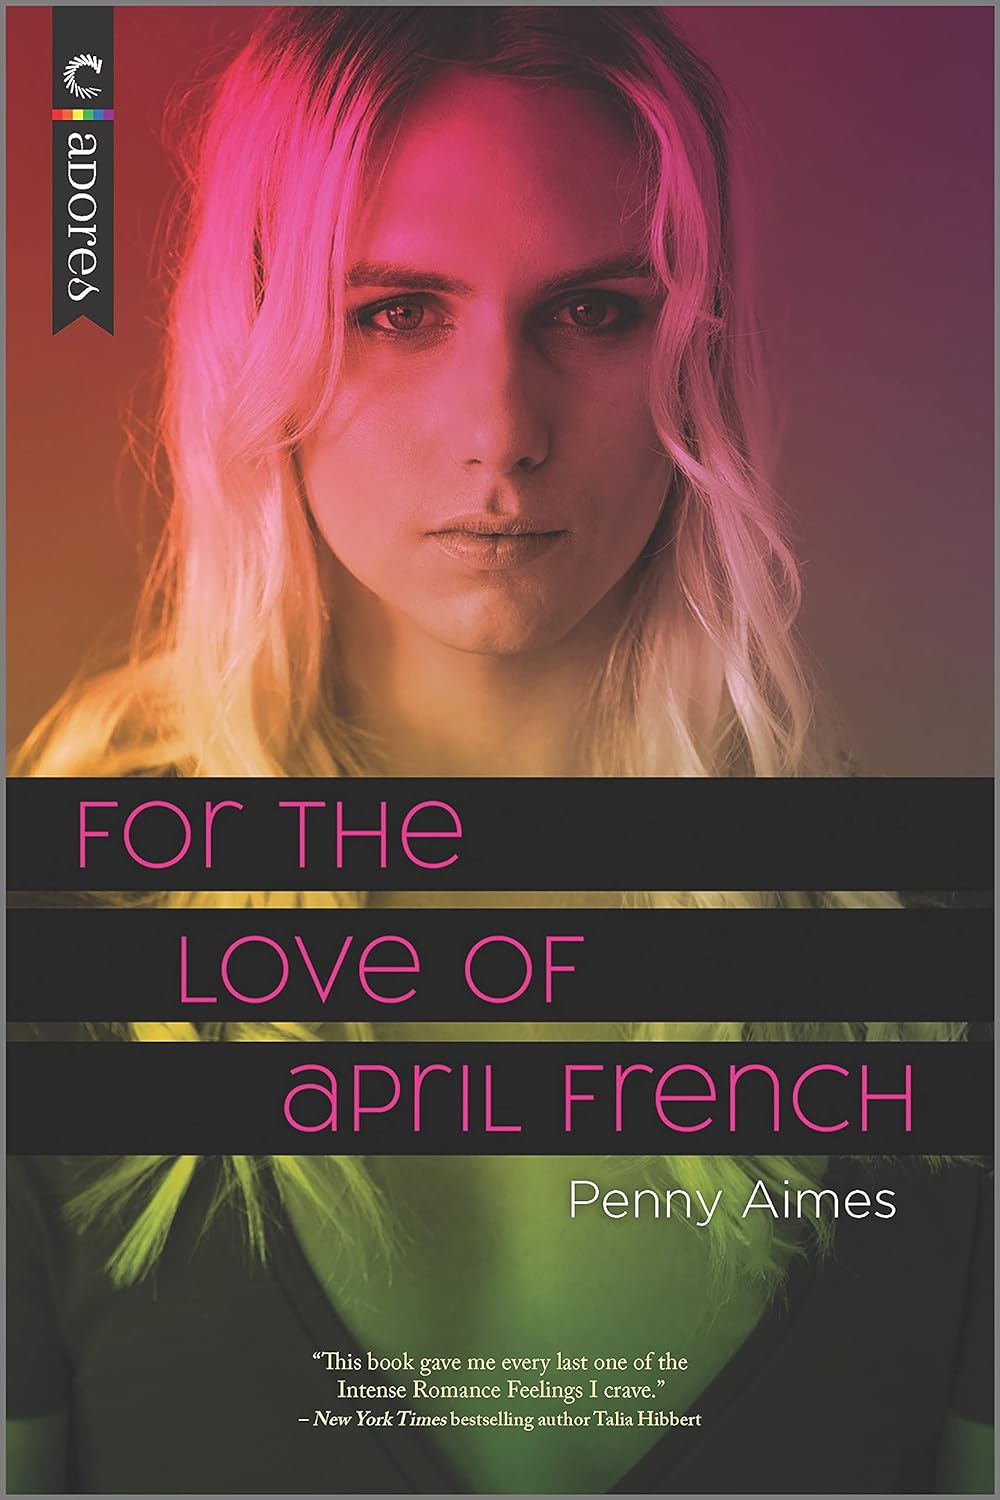 Penny Aimes: For the Love of April French (2021, Harlequin Enterprises ULC)